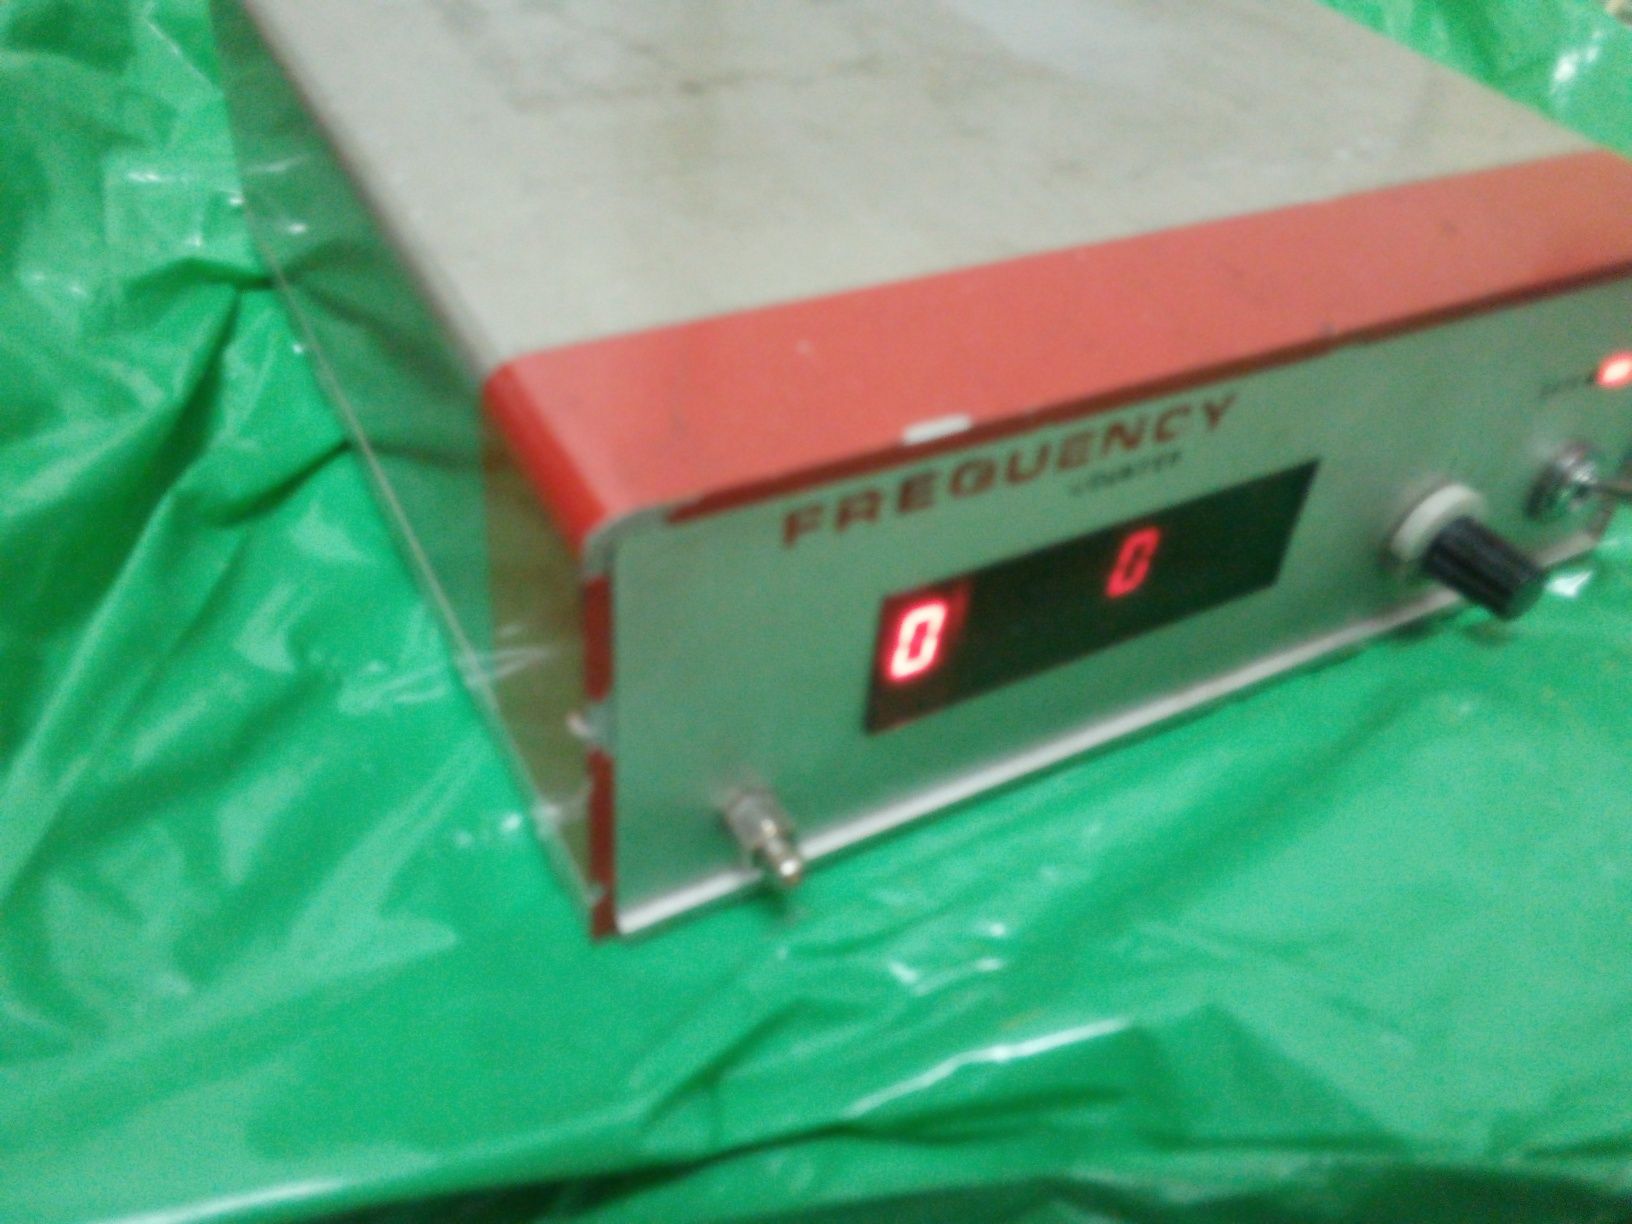 Frequency counter, electronice